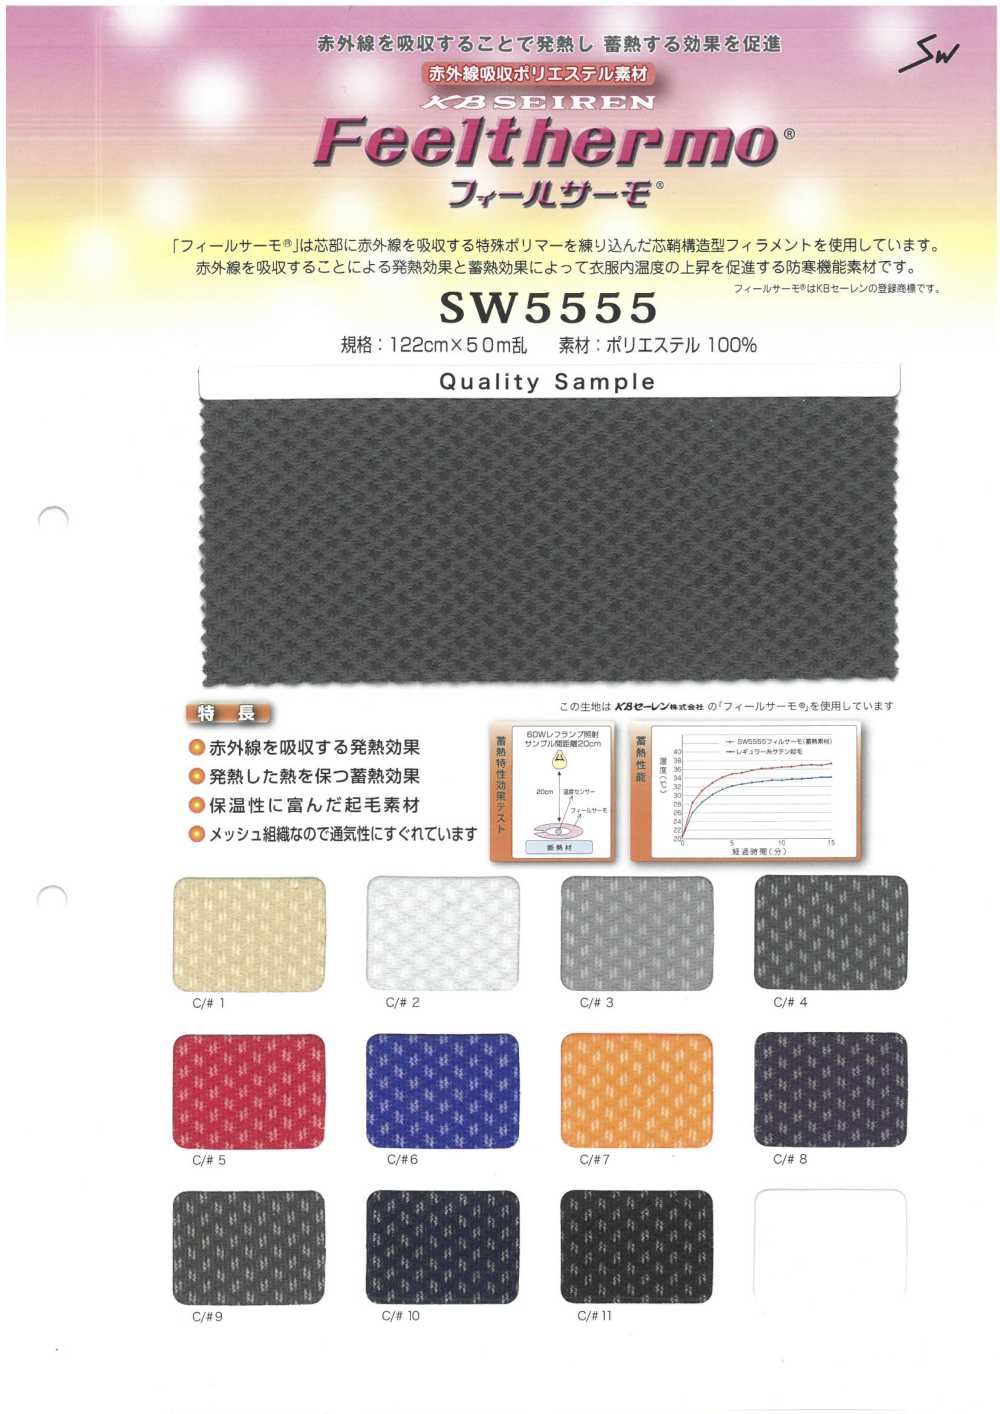 SW5555 Feel Thermo French Fuzzy Mesh[Textile / Fabric] Sanwa Fibers